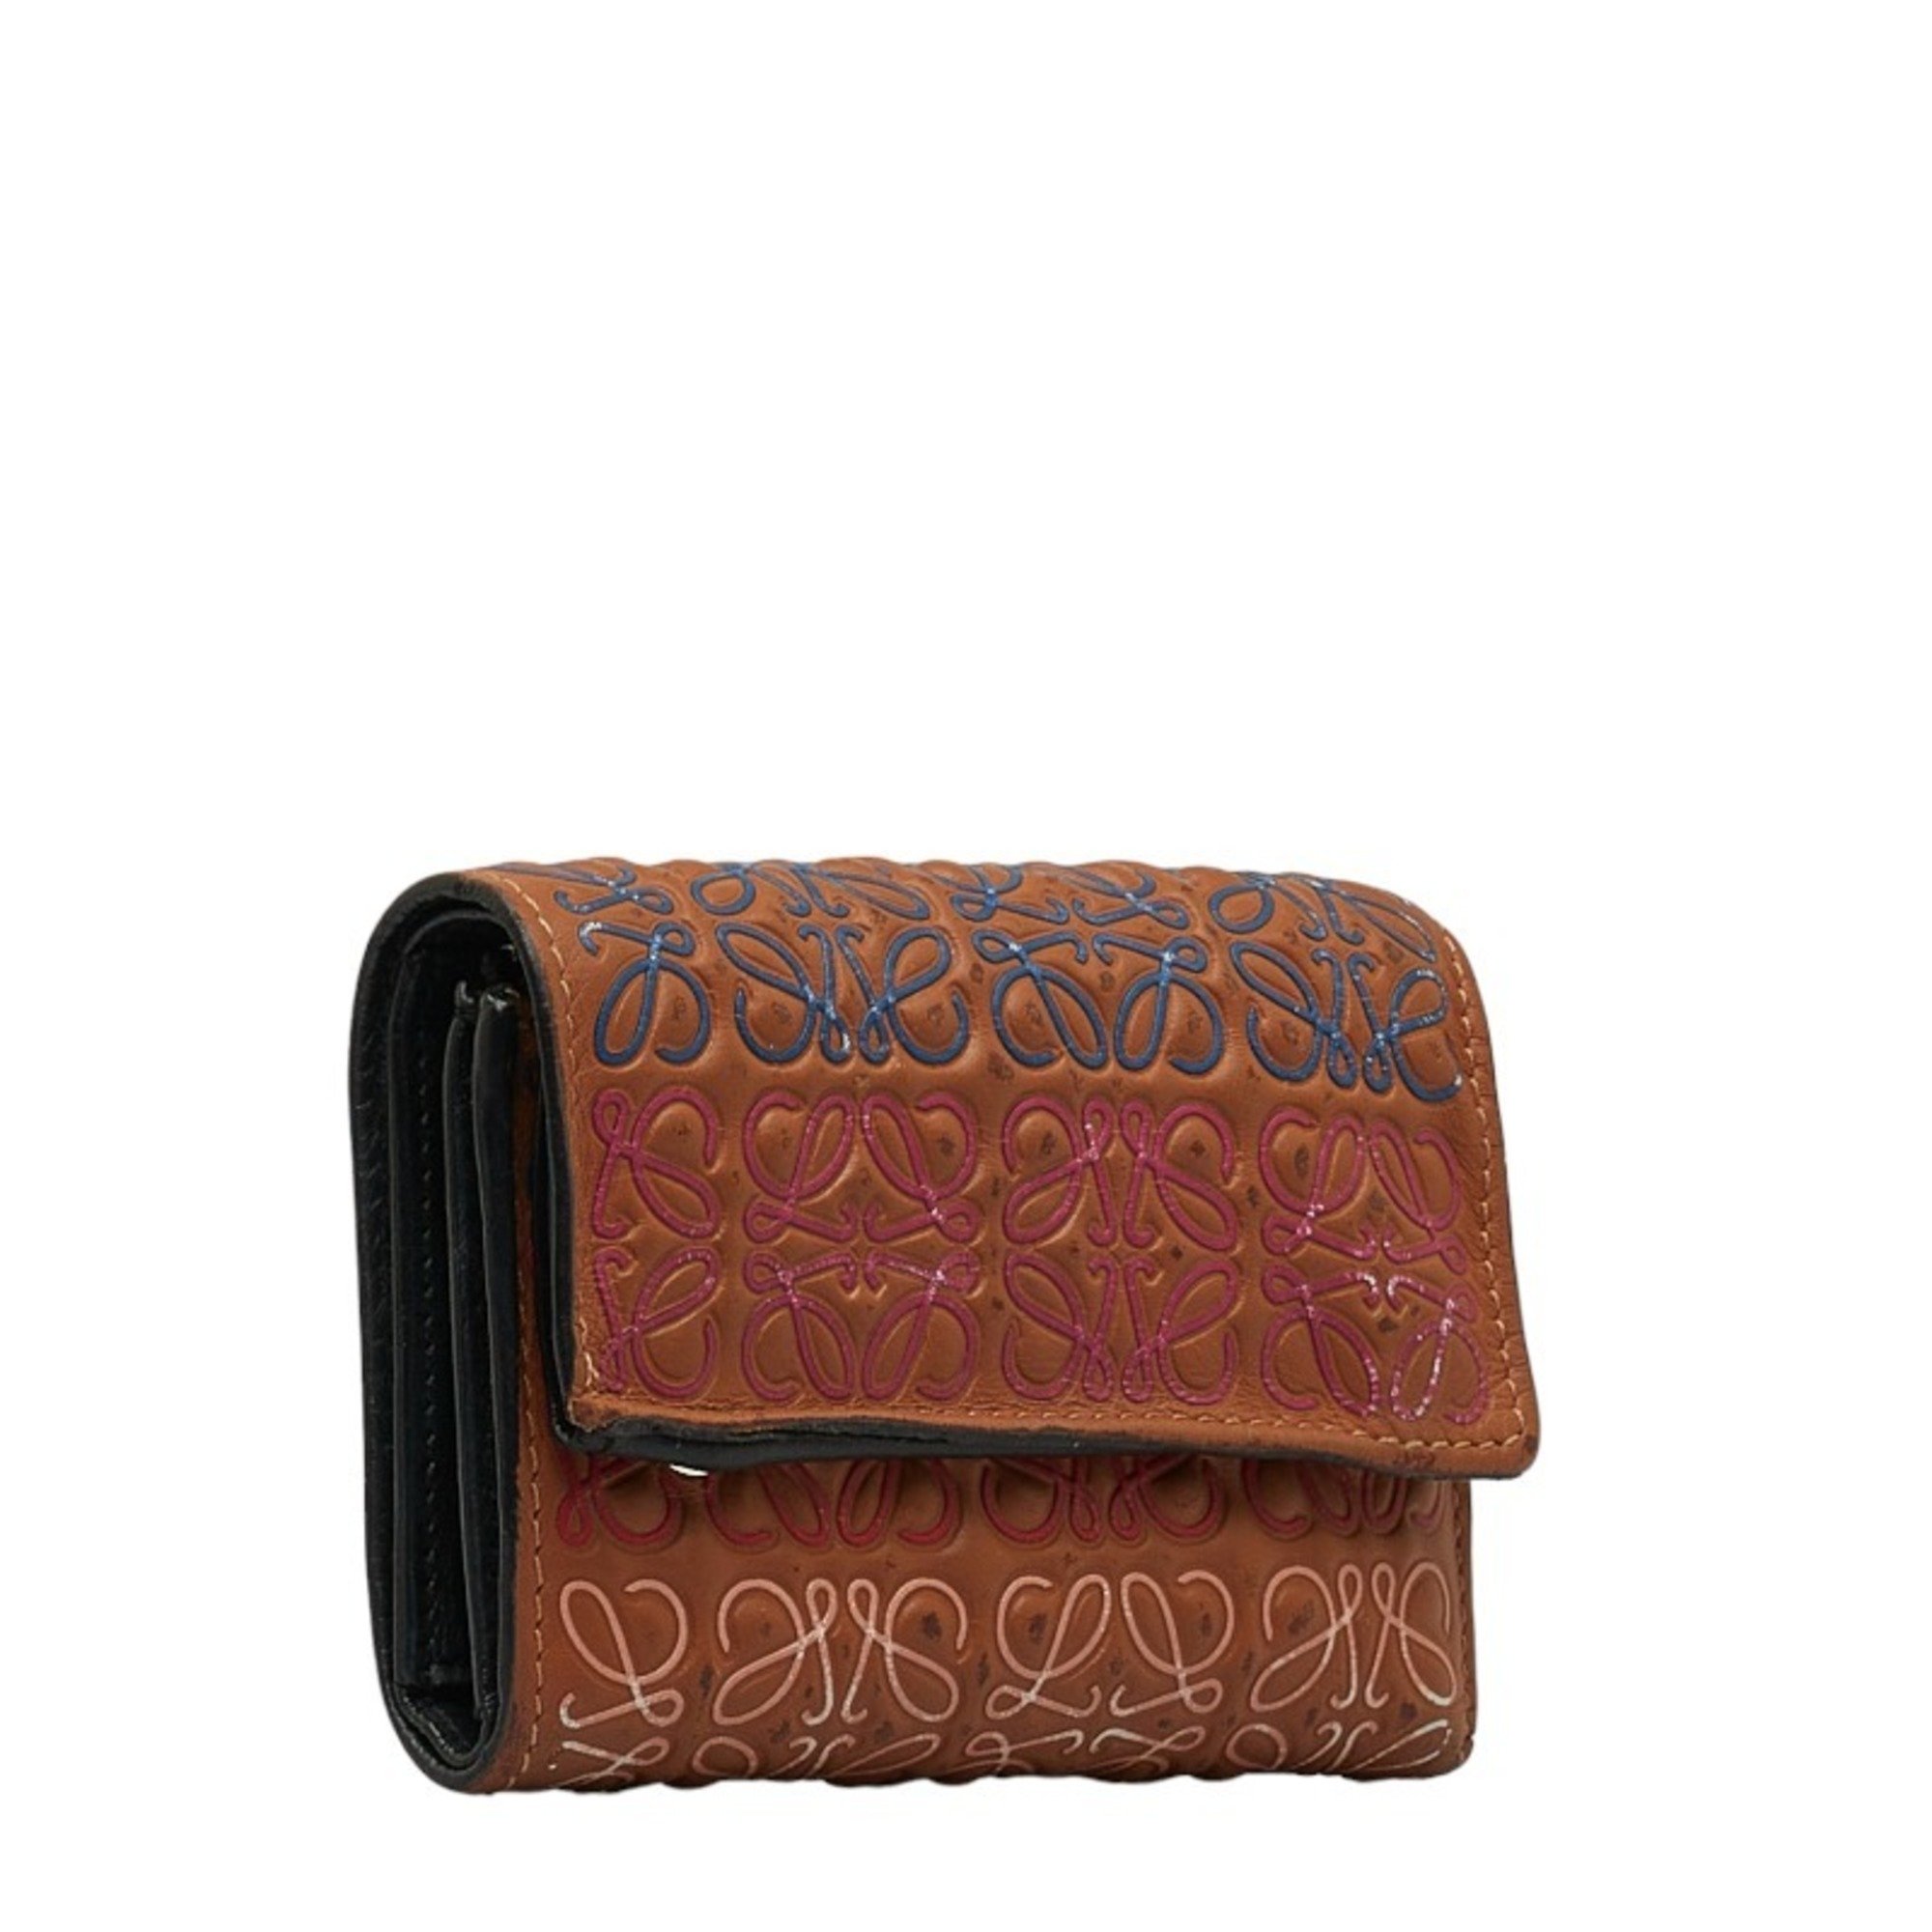 LOEWE Anagram Trifold Wallet Brown Multicolor Leather Women's